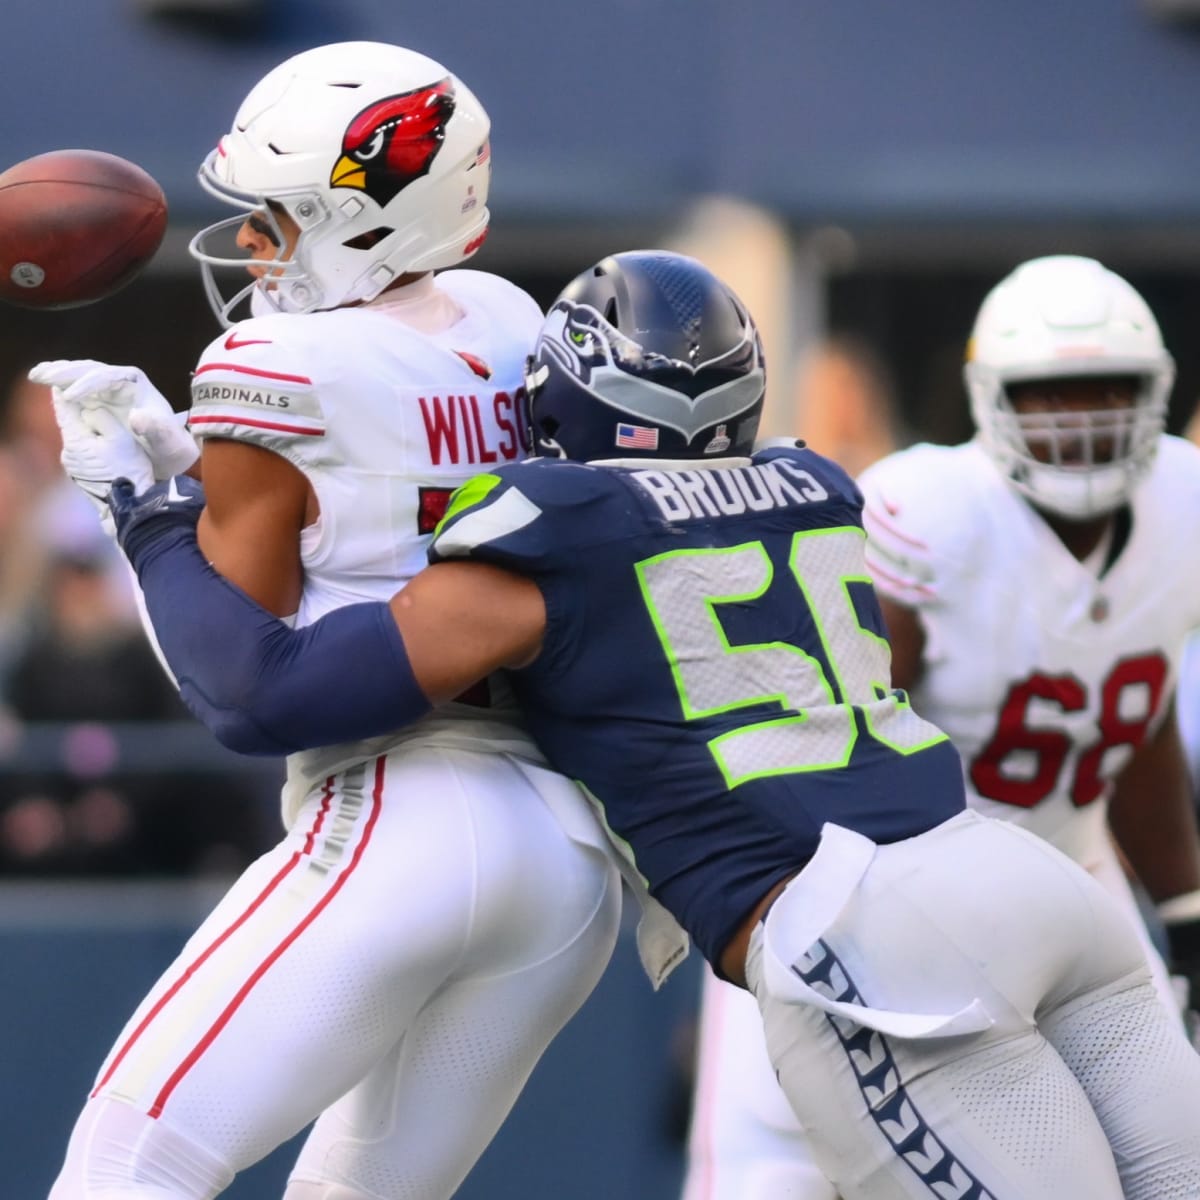 Cardinals wasting time in alternate uniforms, should get rid of them